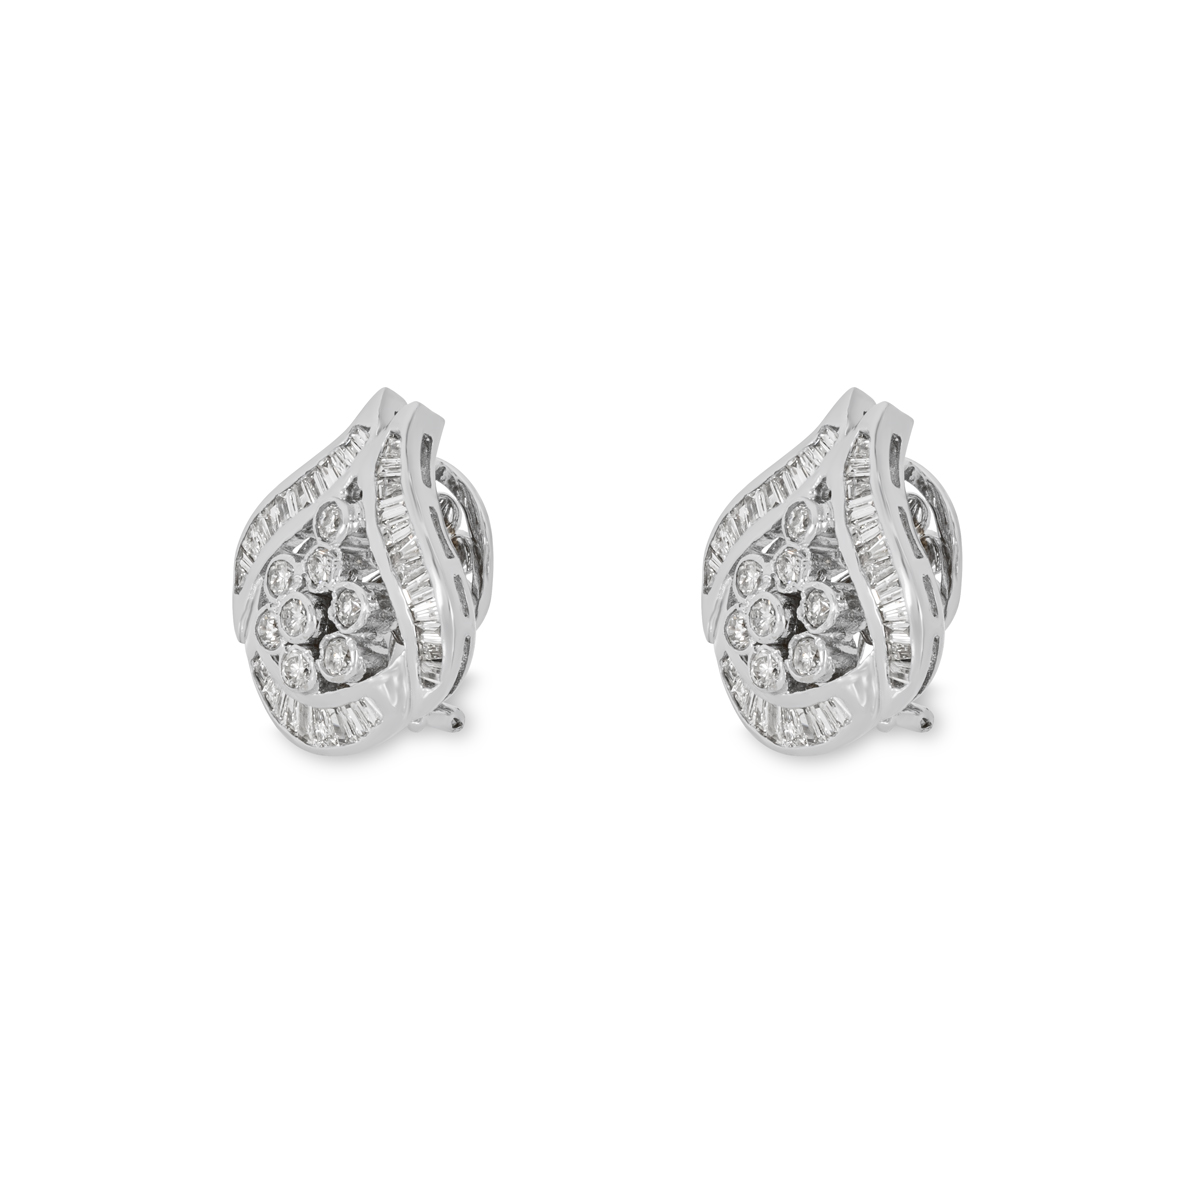 White Gold Floral Cluster Earrings 2.04ct TDW